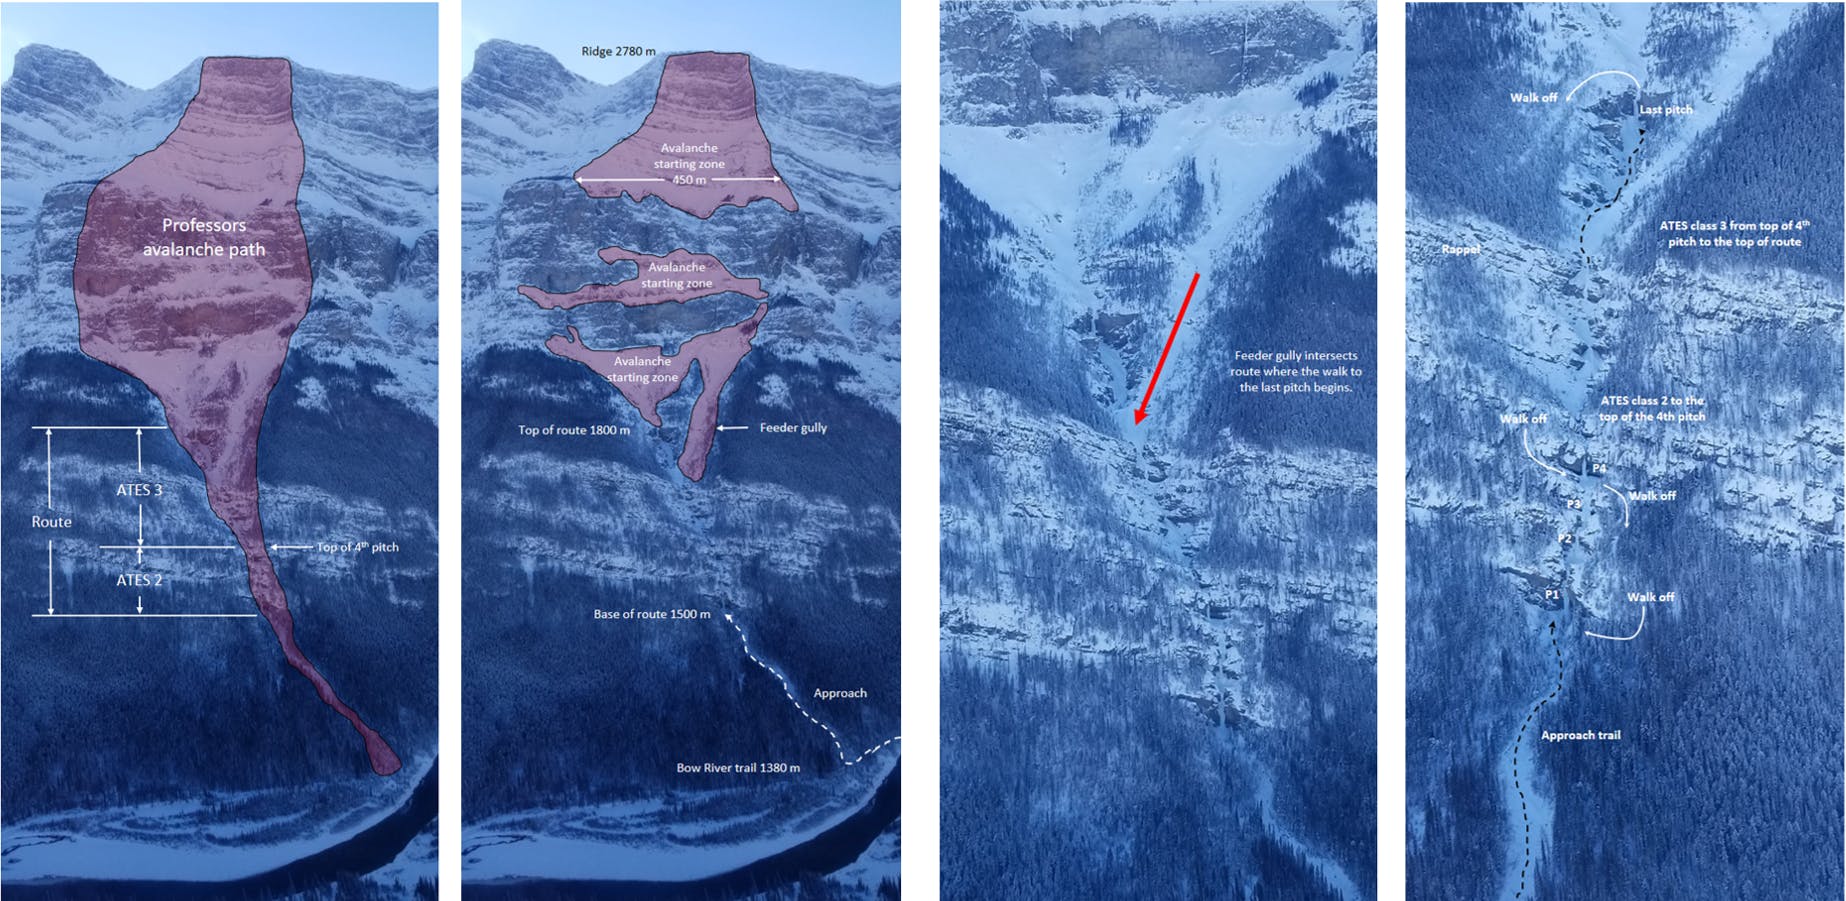 Four photos of Professor Falls. The left shows the full Professor's avalanche path. Second from left shows the avalanche start zones. The third shows a close-up of the ice climb. The fourth is a detailed, annotated route of the climb.